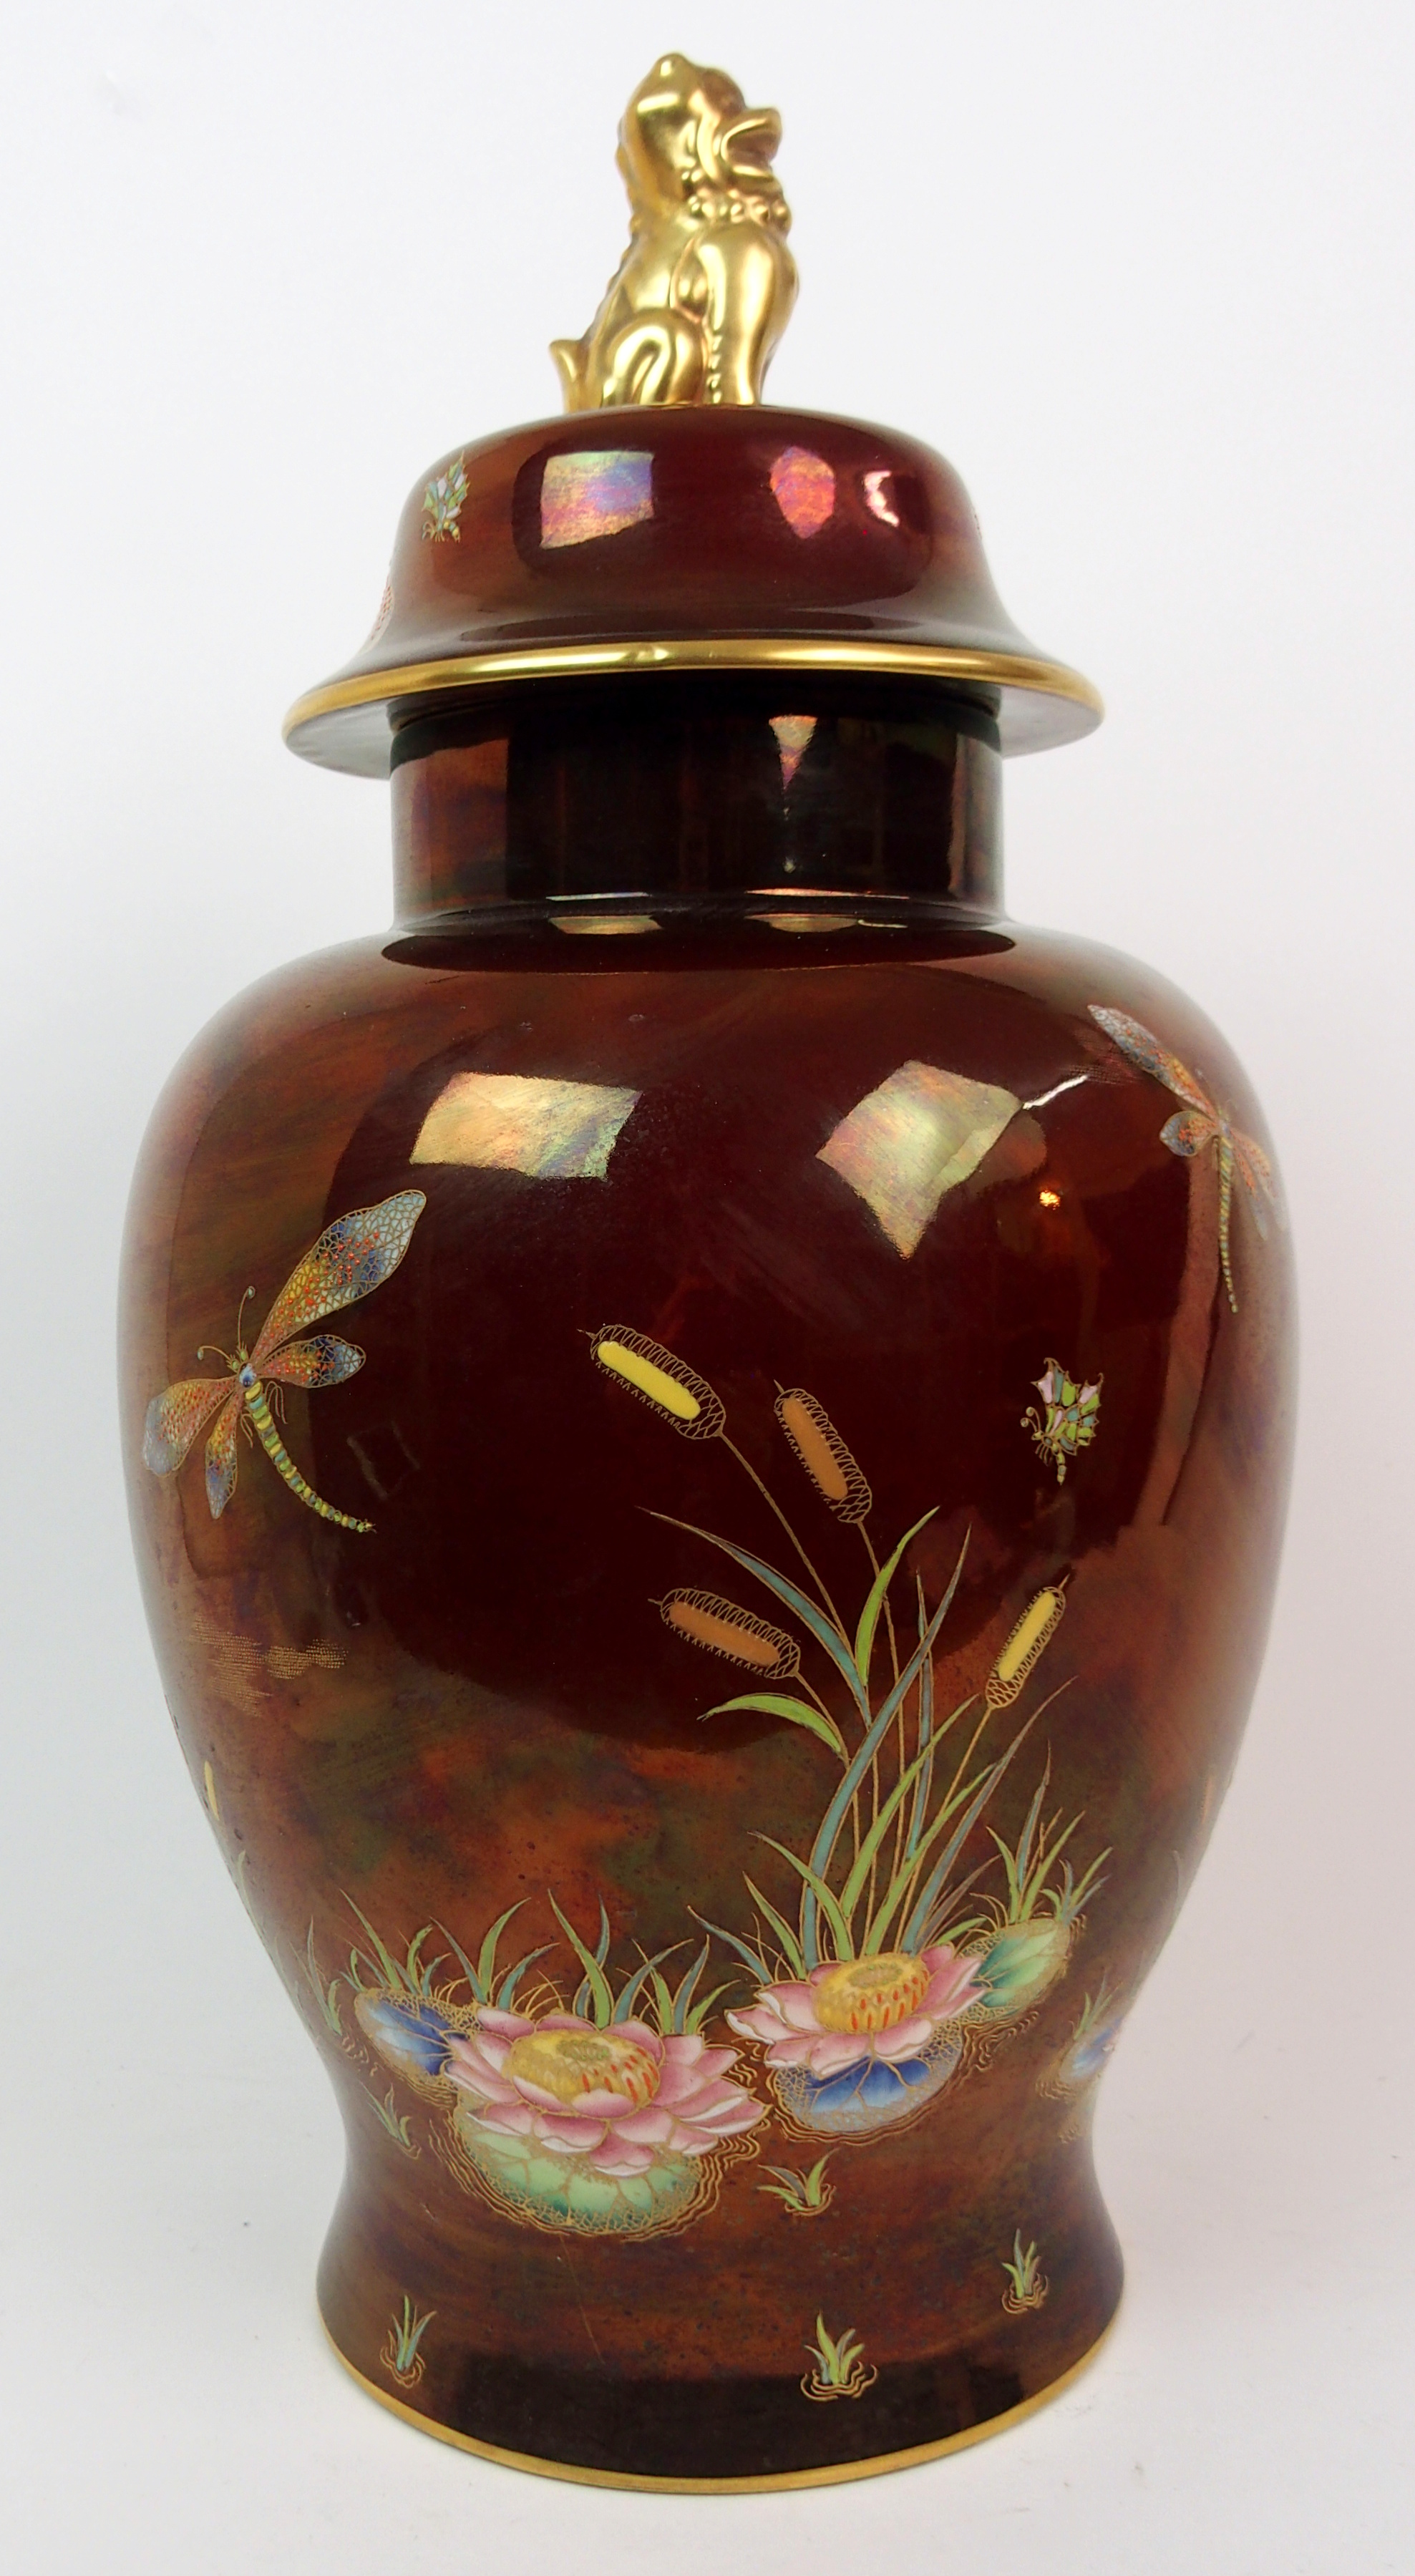 A CARLTON WARE ROUGUE ROYALE JAR AND COVER the body decorated with bullrushes, waterlilies and